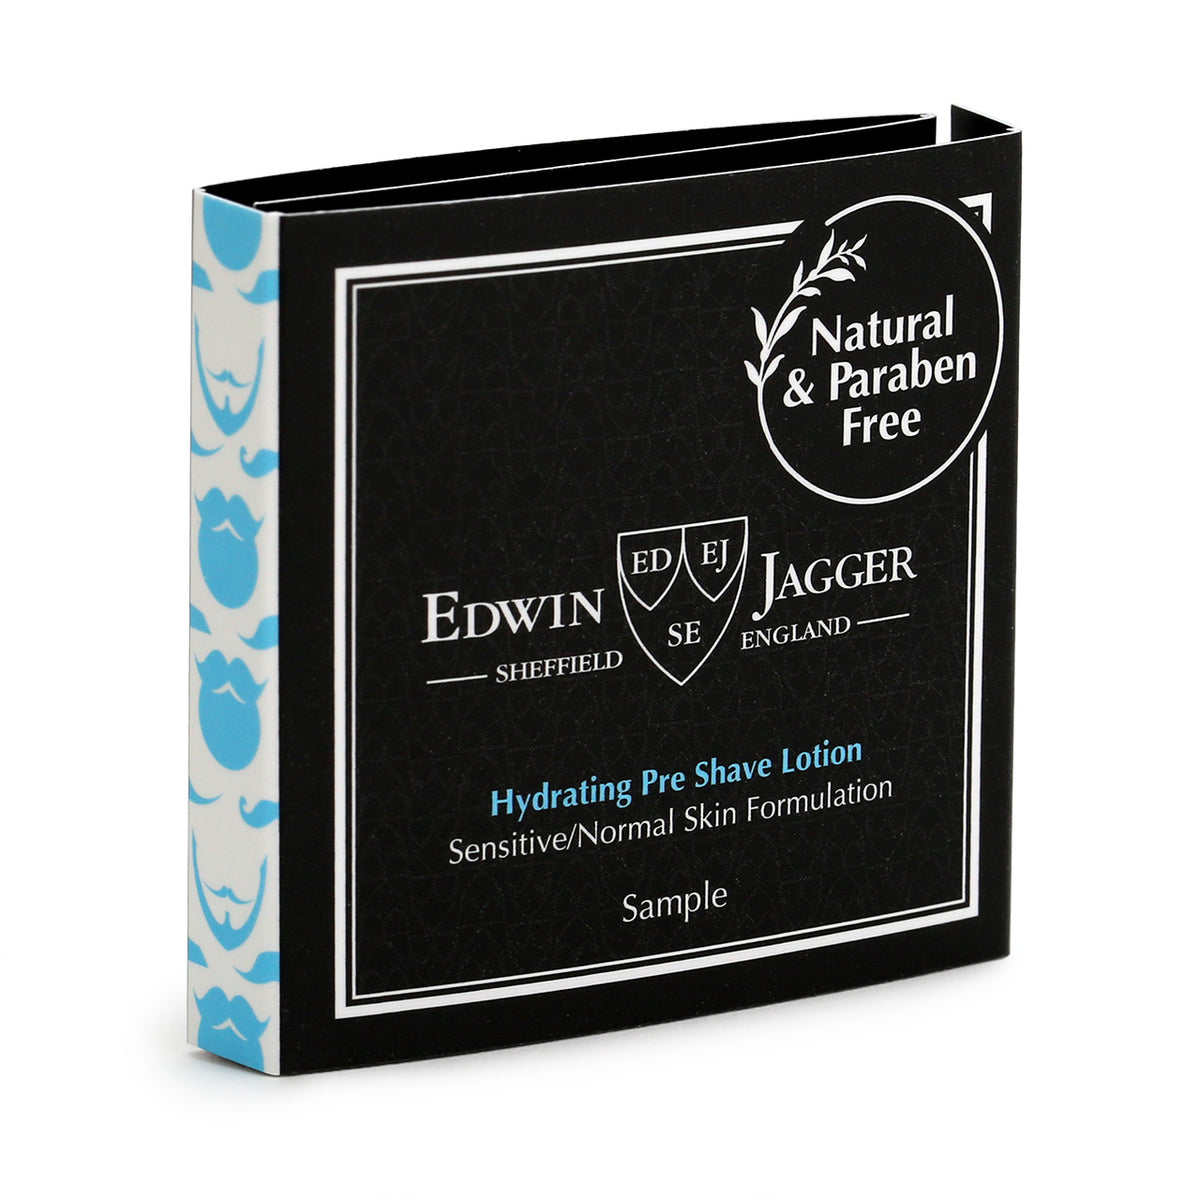 Edwin Jagger sample-sized Hydrating Pre Shave Lotion